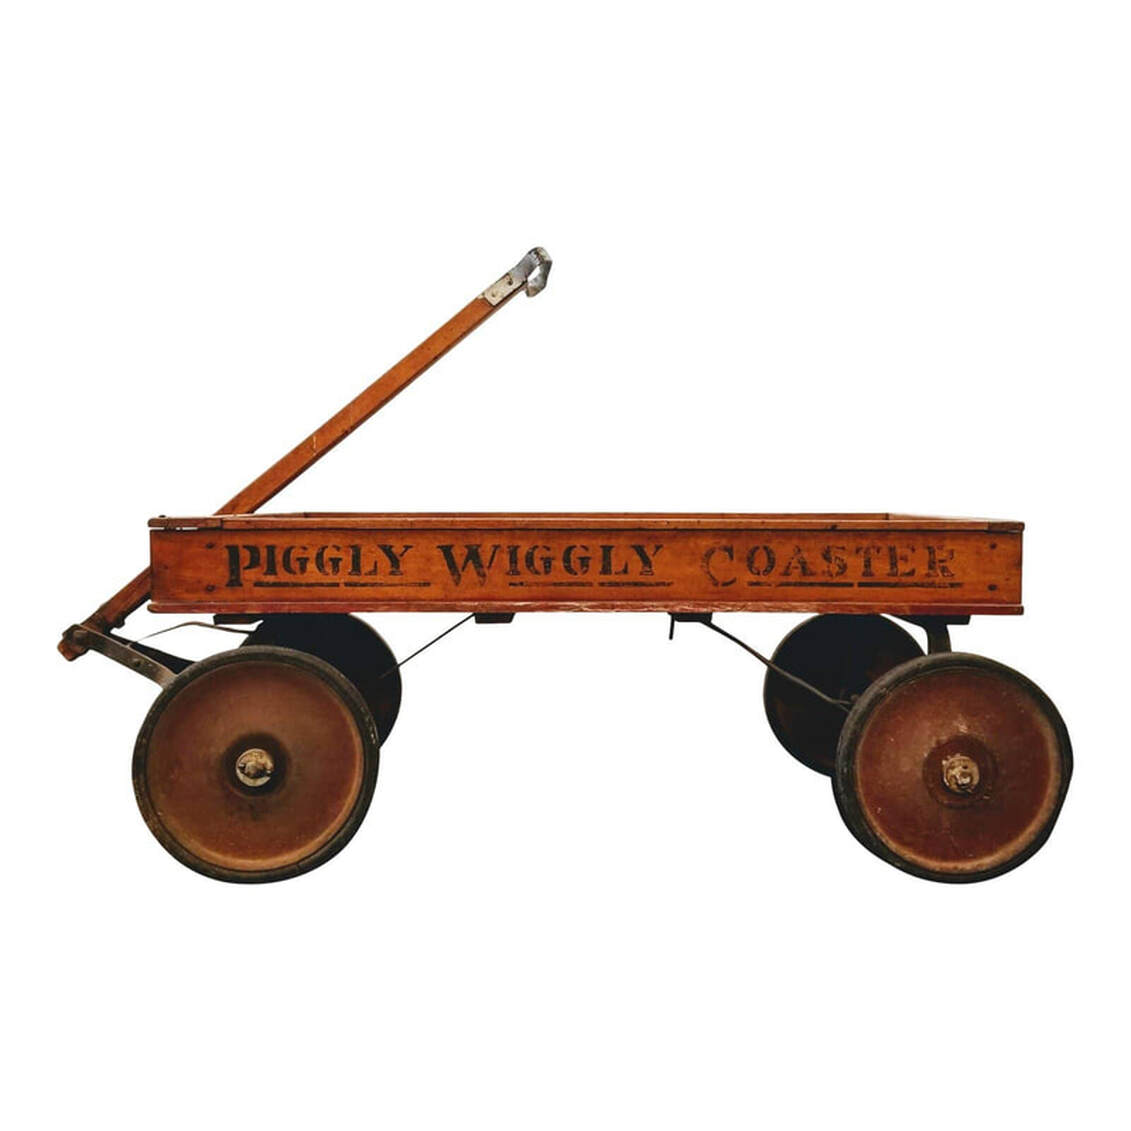 What a cool piece of San Diego history this Piggly Wiggly Coaster is!  Piggly Wiggly first opened in San Diego in October 1922. In 1926 Jack Hartley opened one on 30th Street in North Park, followed by multiple stores including the one on Park Boulevard (now known as Sprouts), which is where this wagon was acquired.  The wooden wagon retains much of the faded red paint and the black hand painted lettering spelling out 